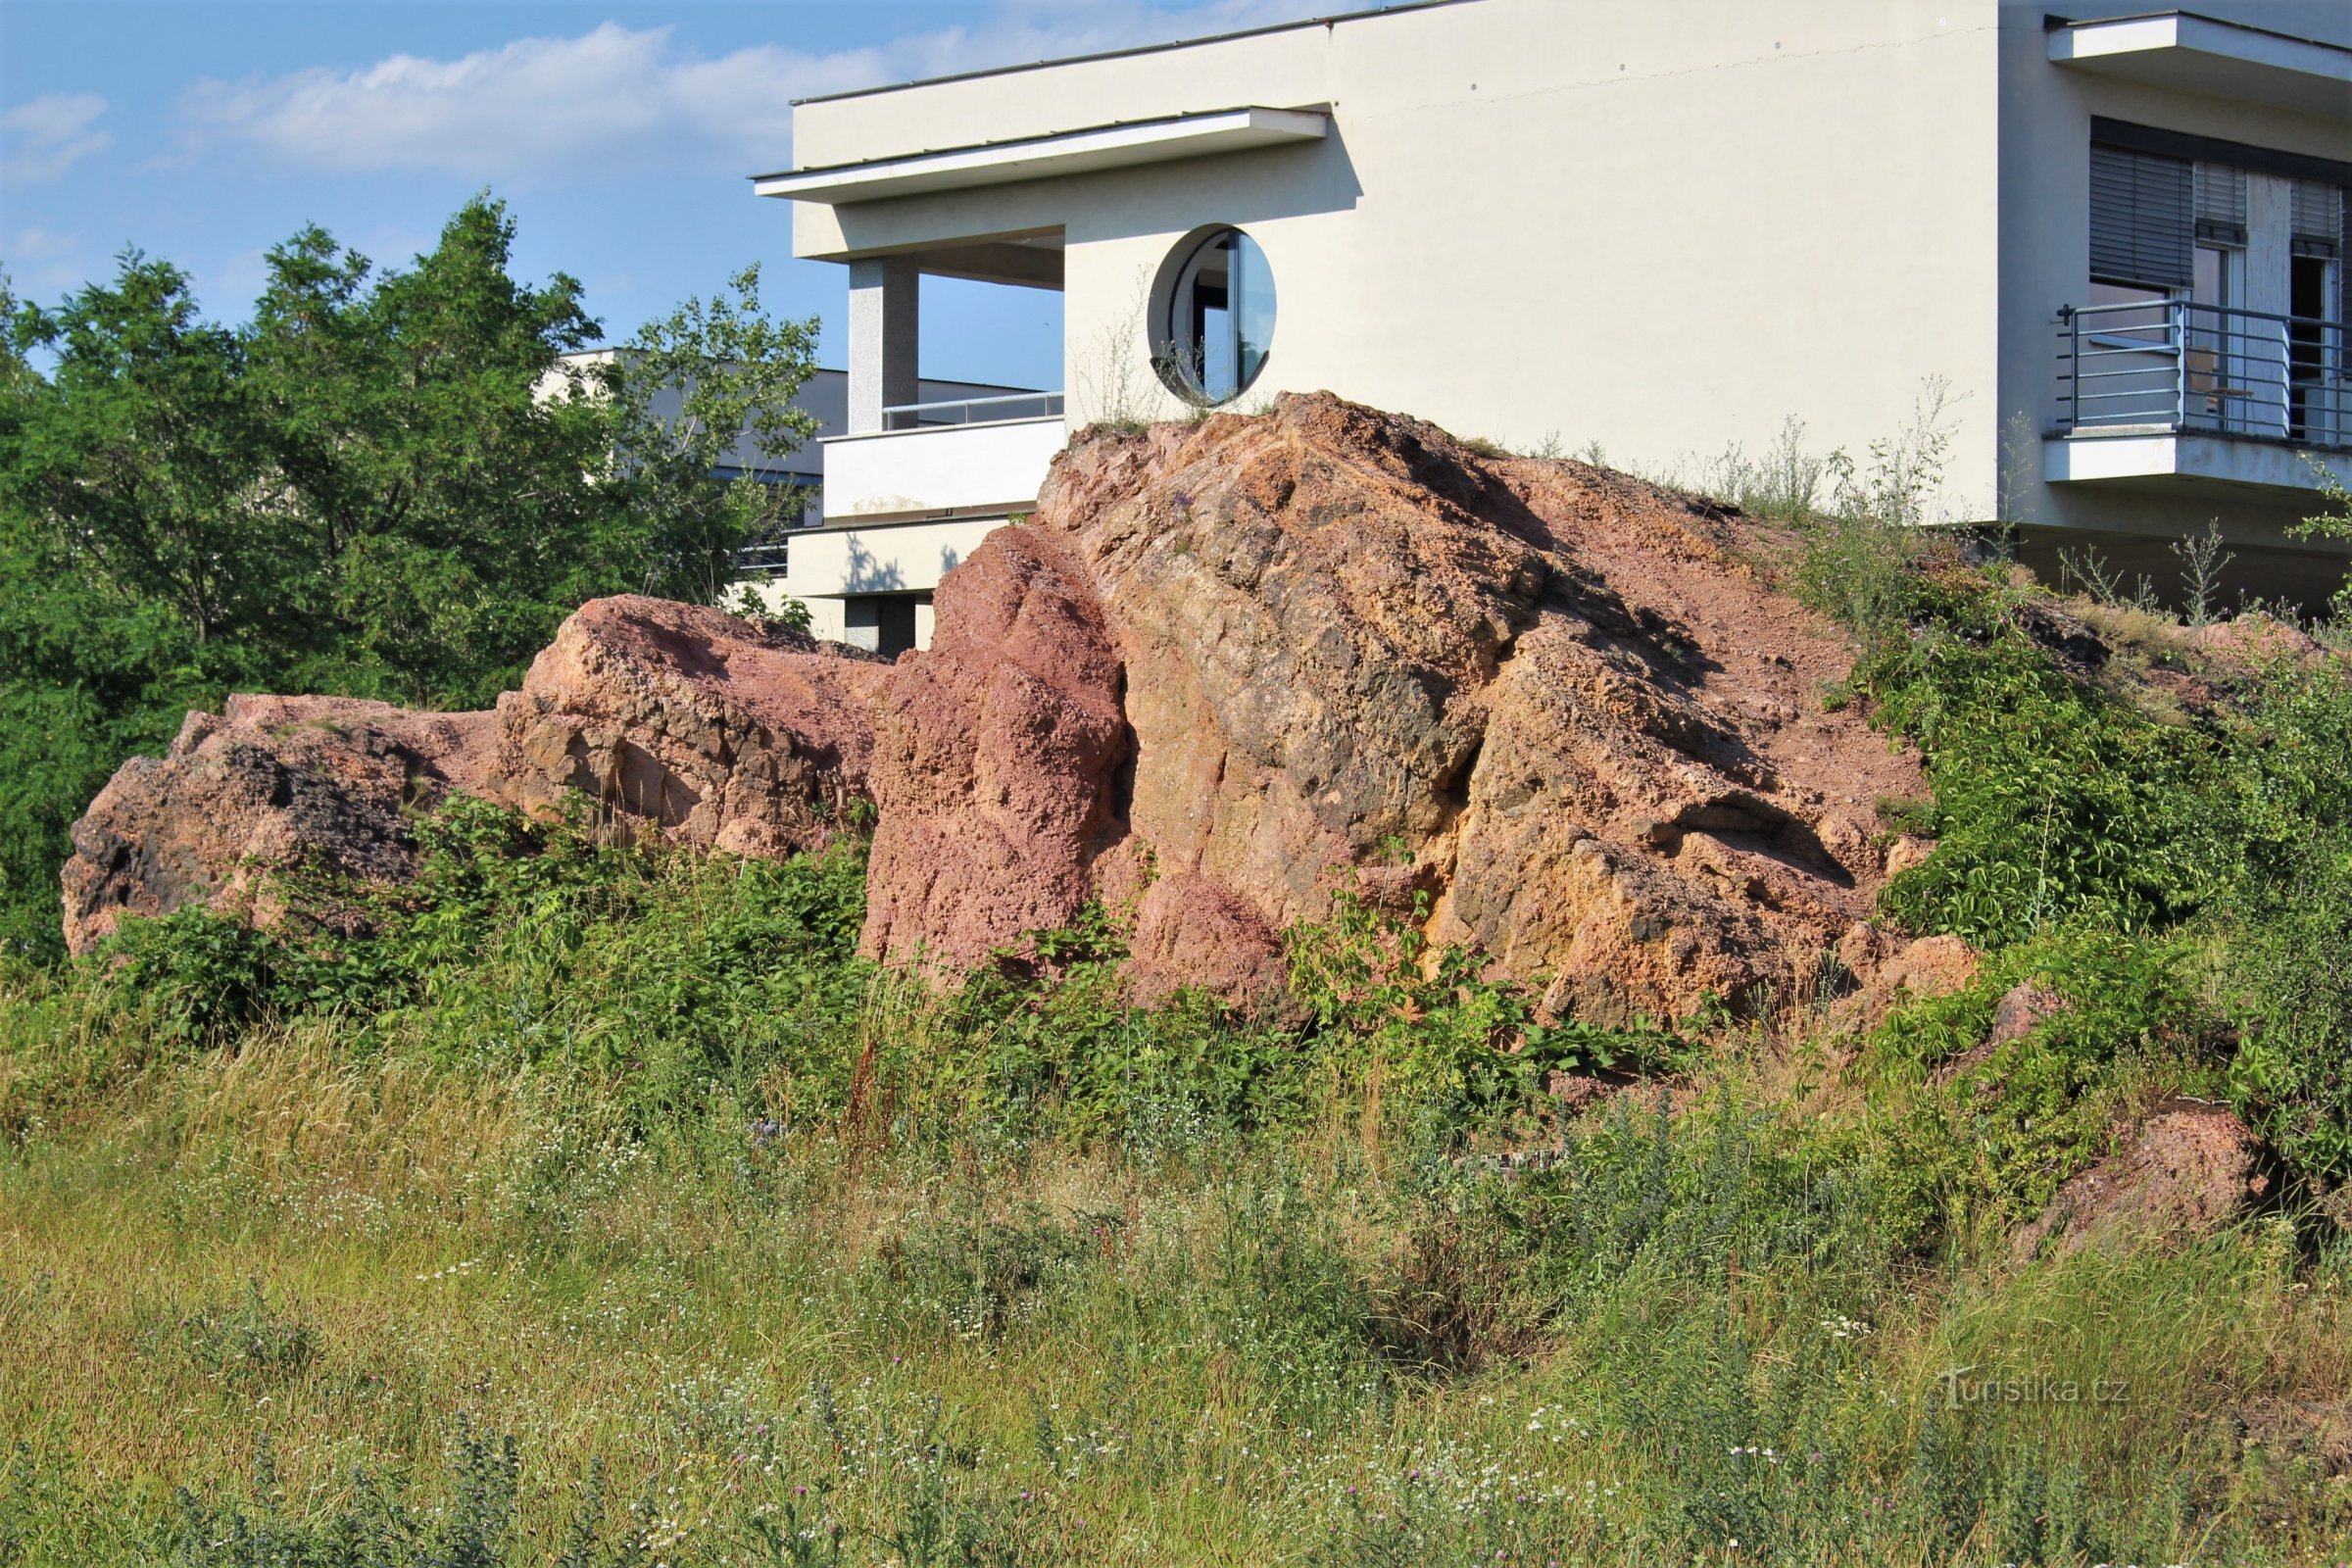 Heligoland rock, behind it the buildings of the Masaryk Institute of Oncology